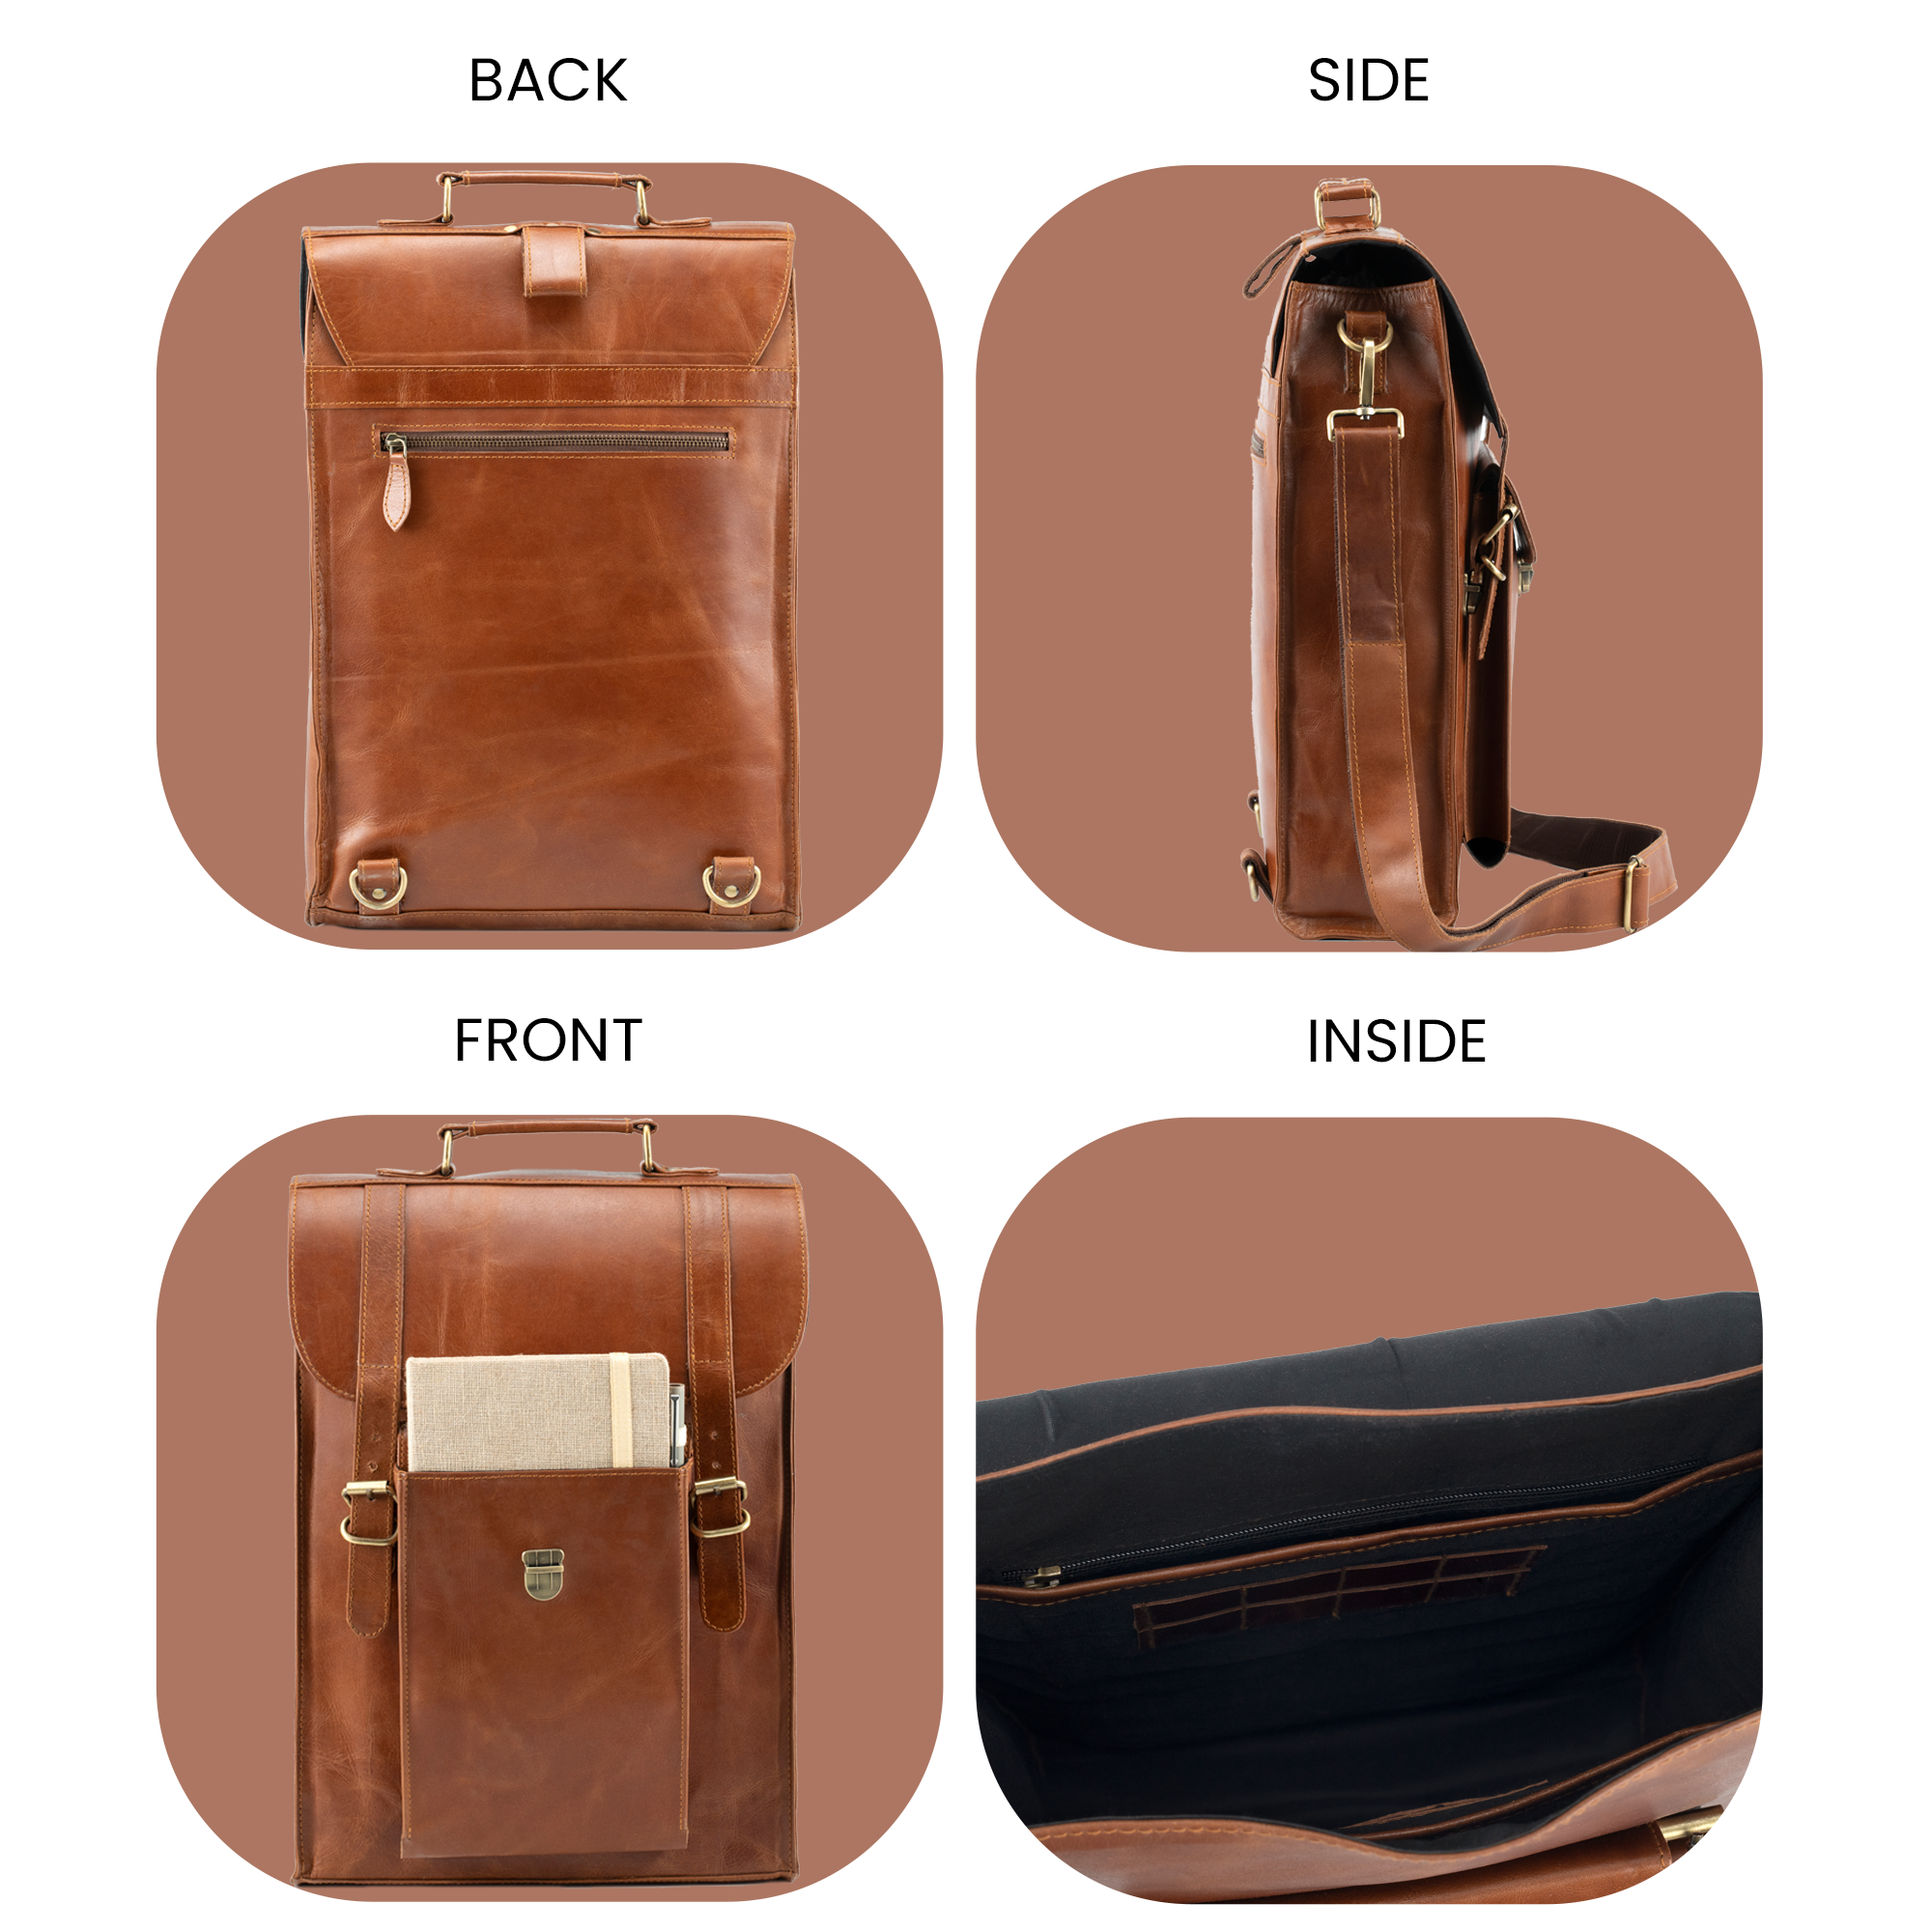 highlighting all sides of the leather bag showing back zipper pocket, side fittings, front pocket, and inside of leather backpack